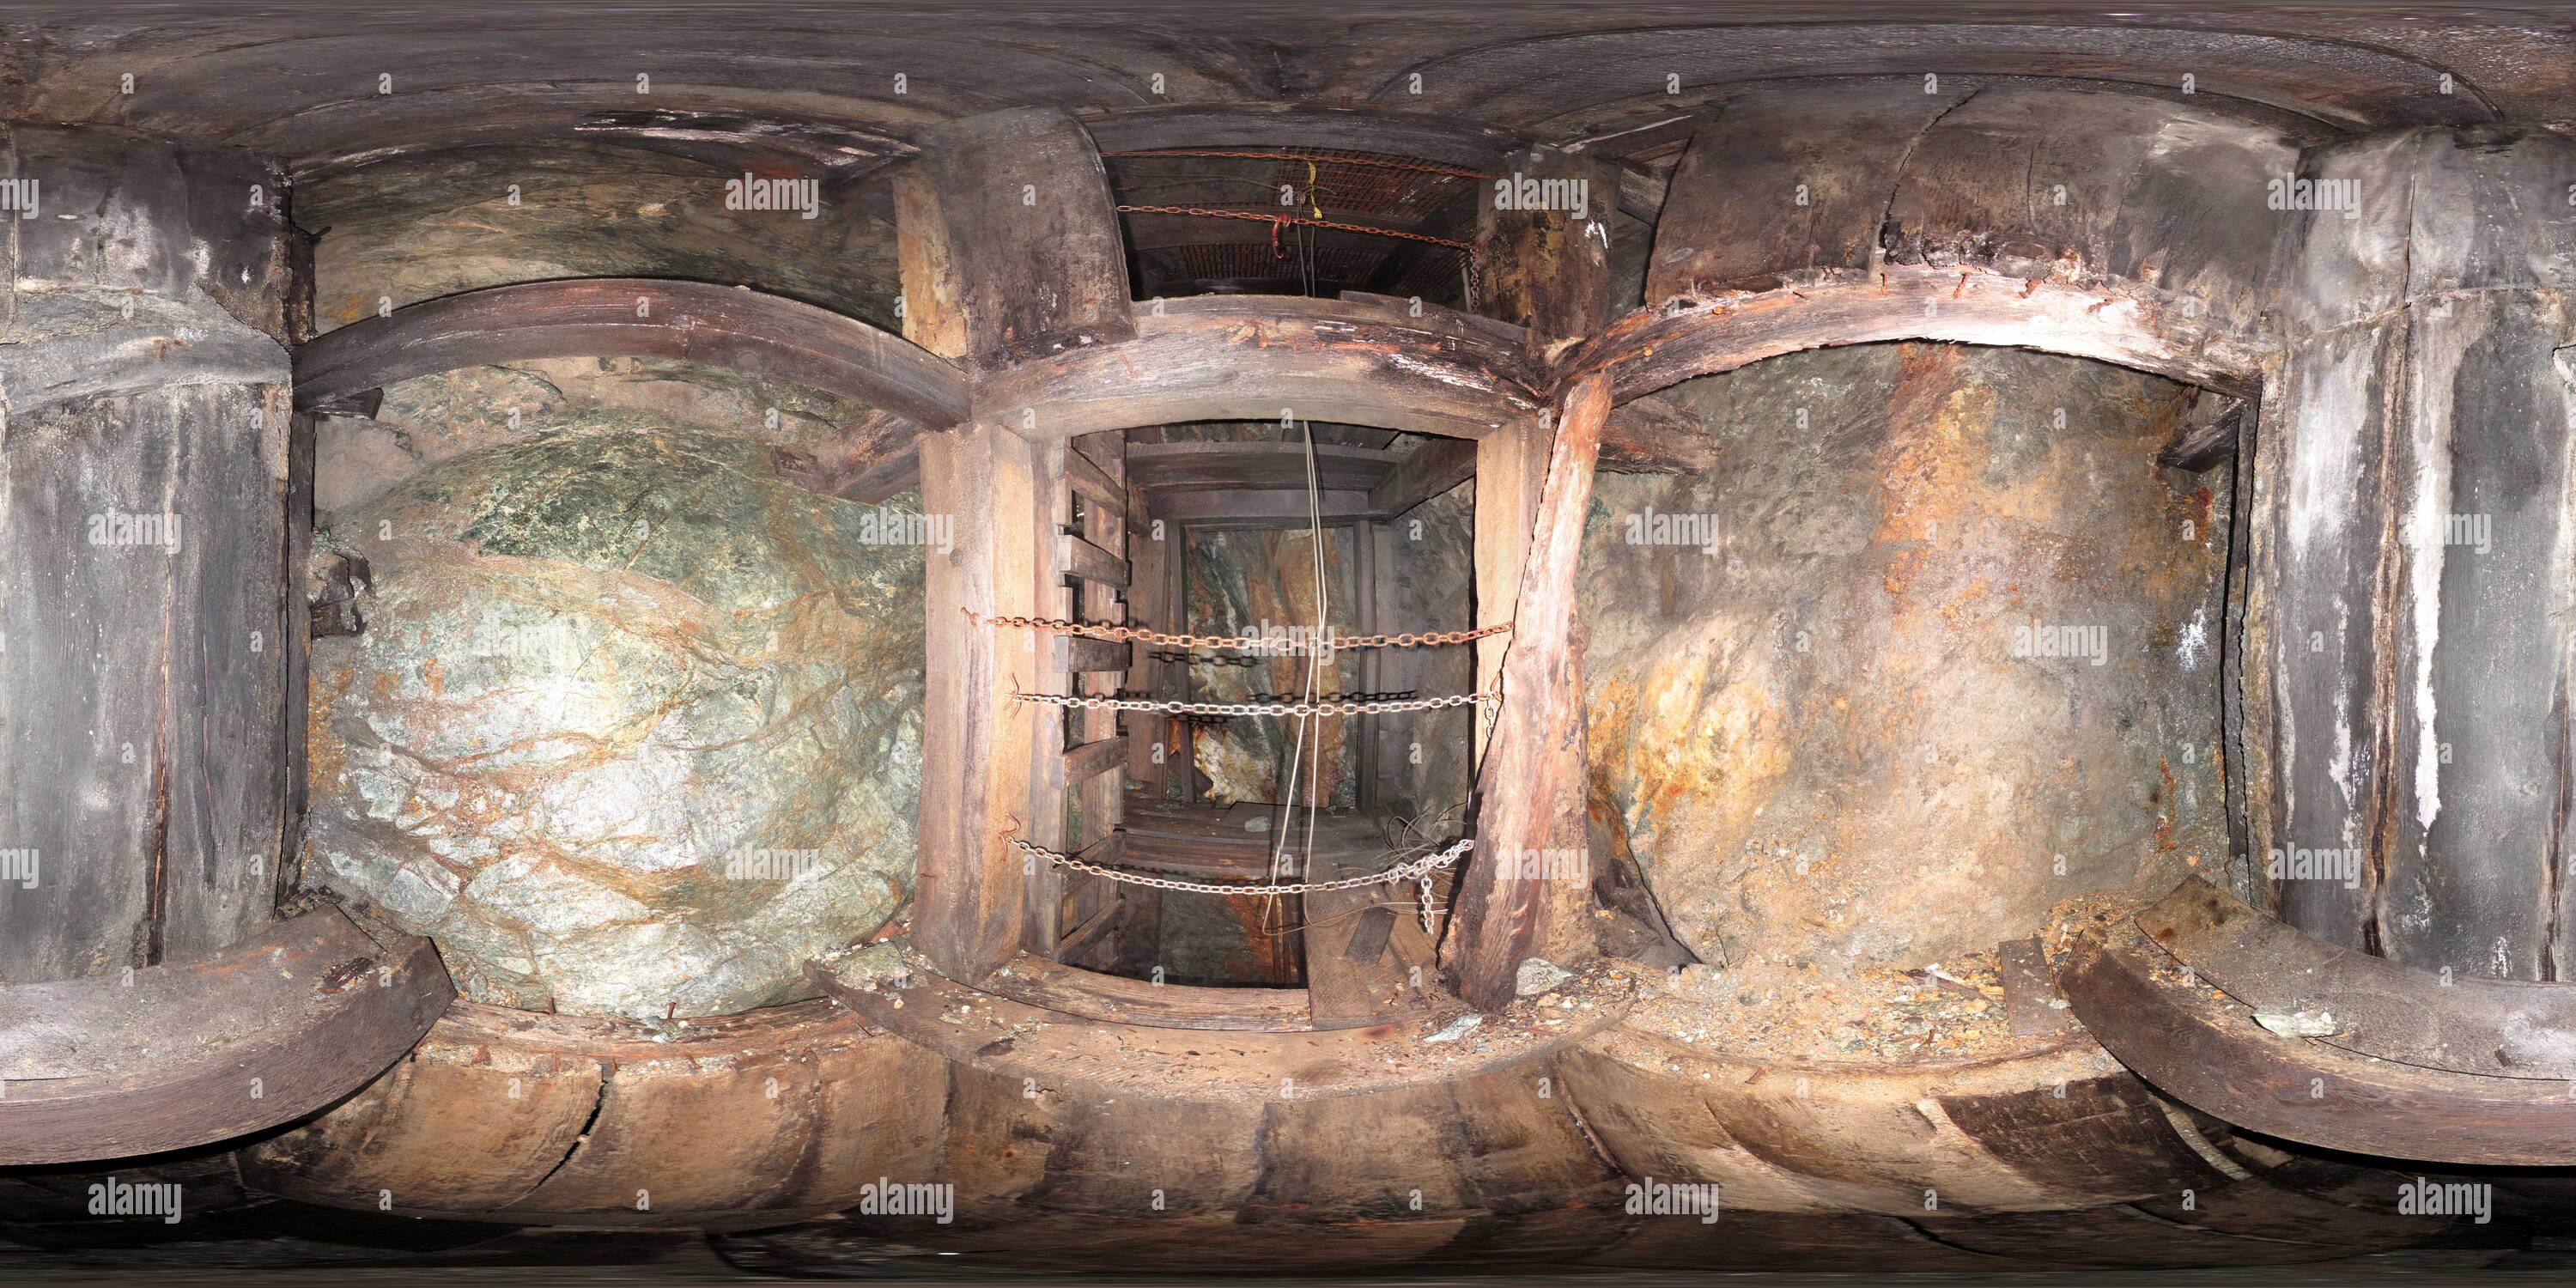 360 degree panoramic view of Houghton Mine - 800 level secondary escape ore chute